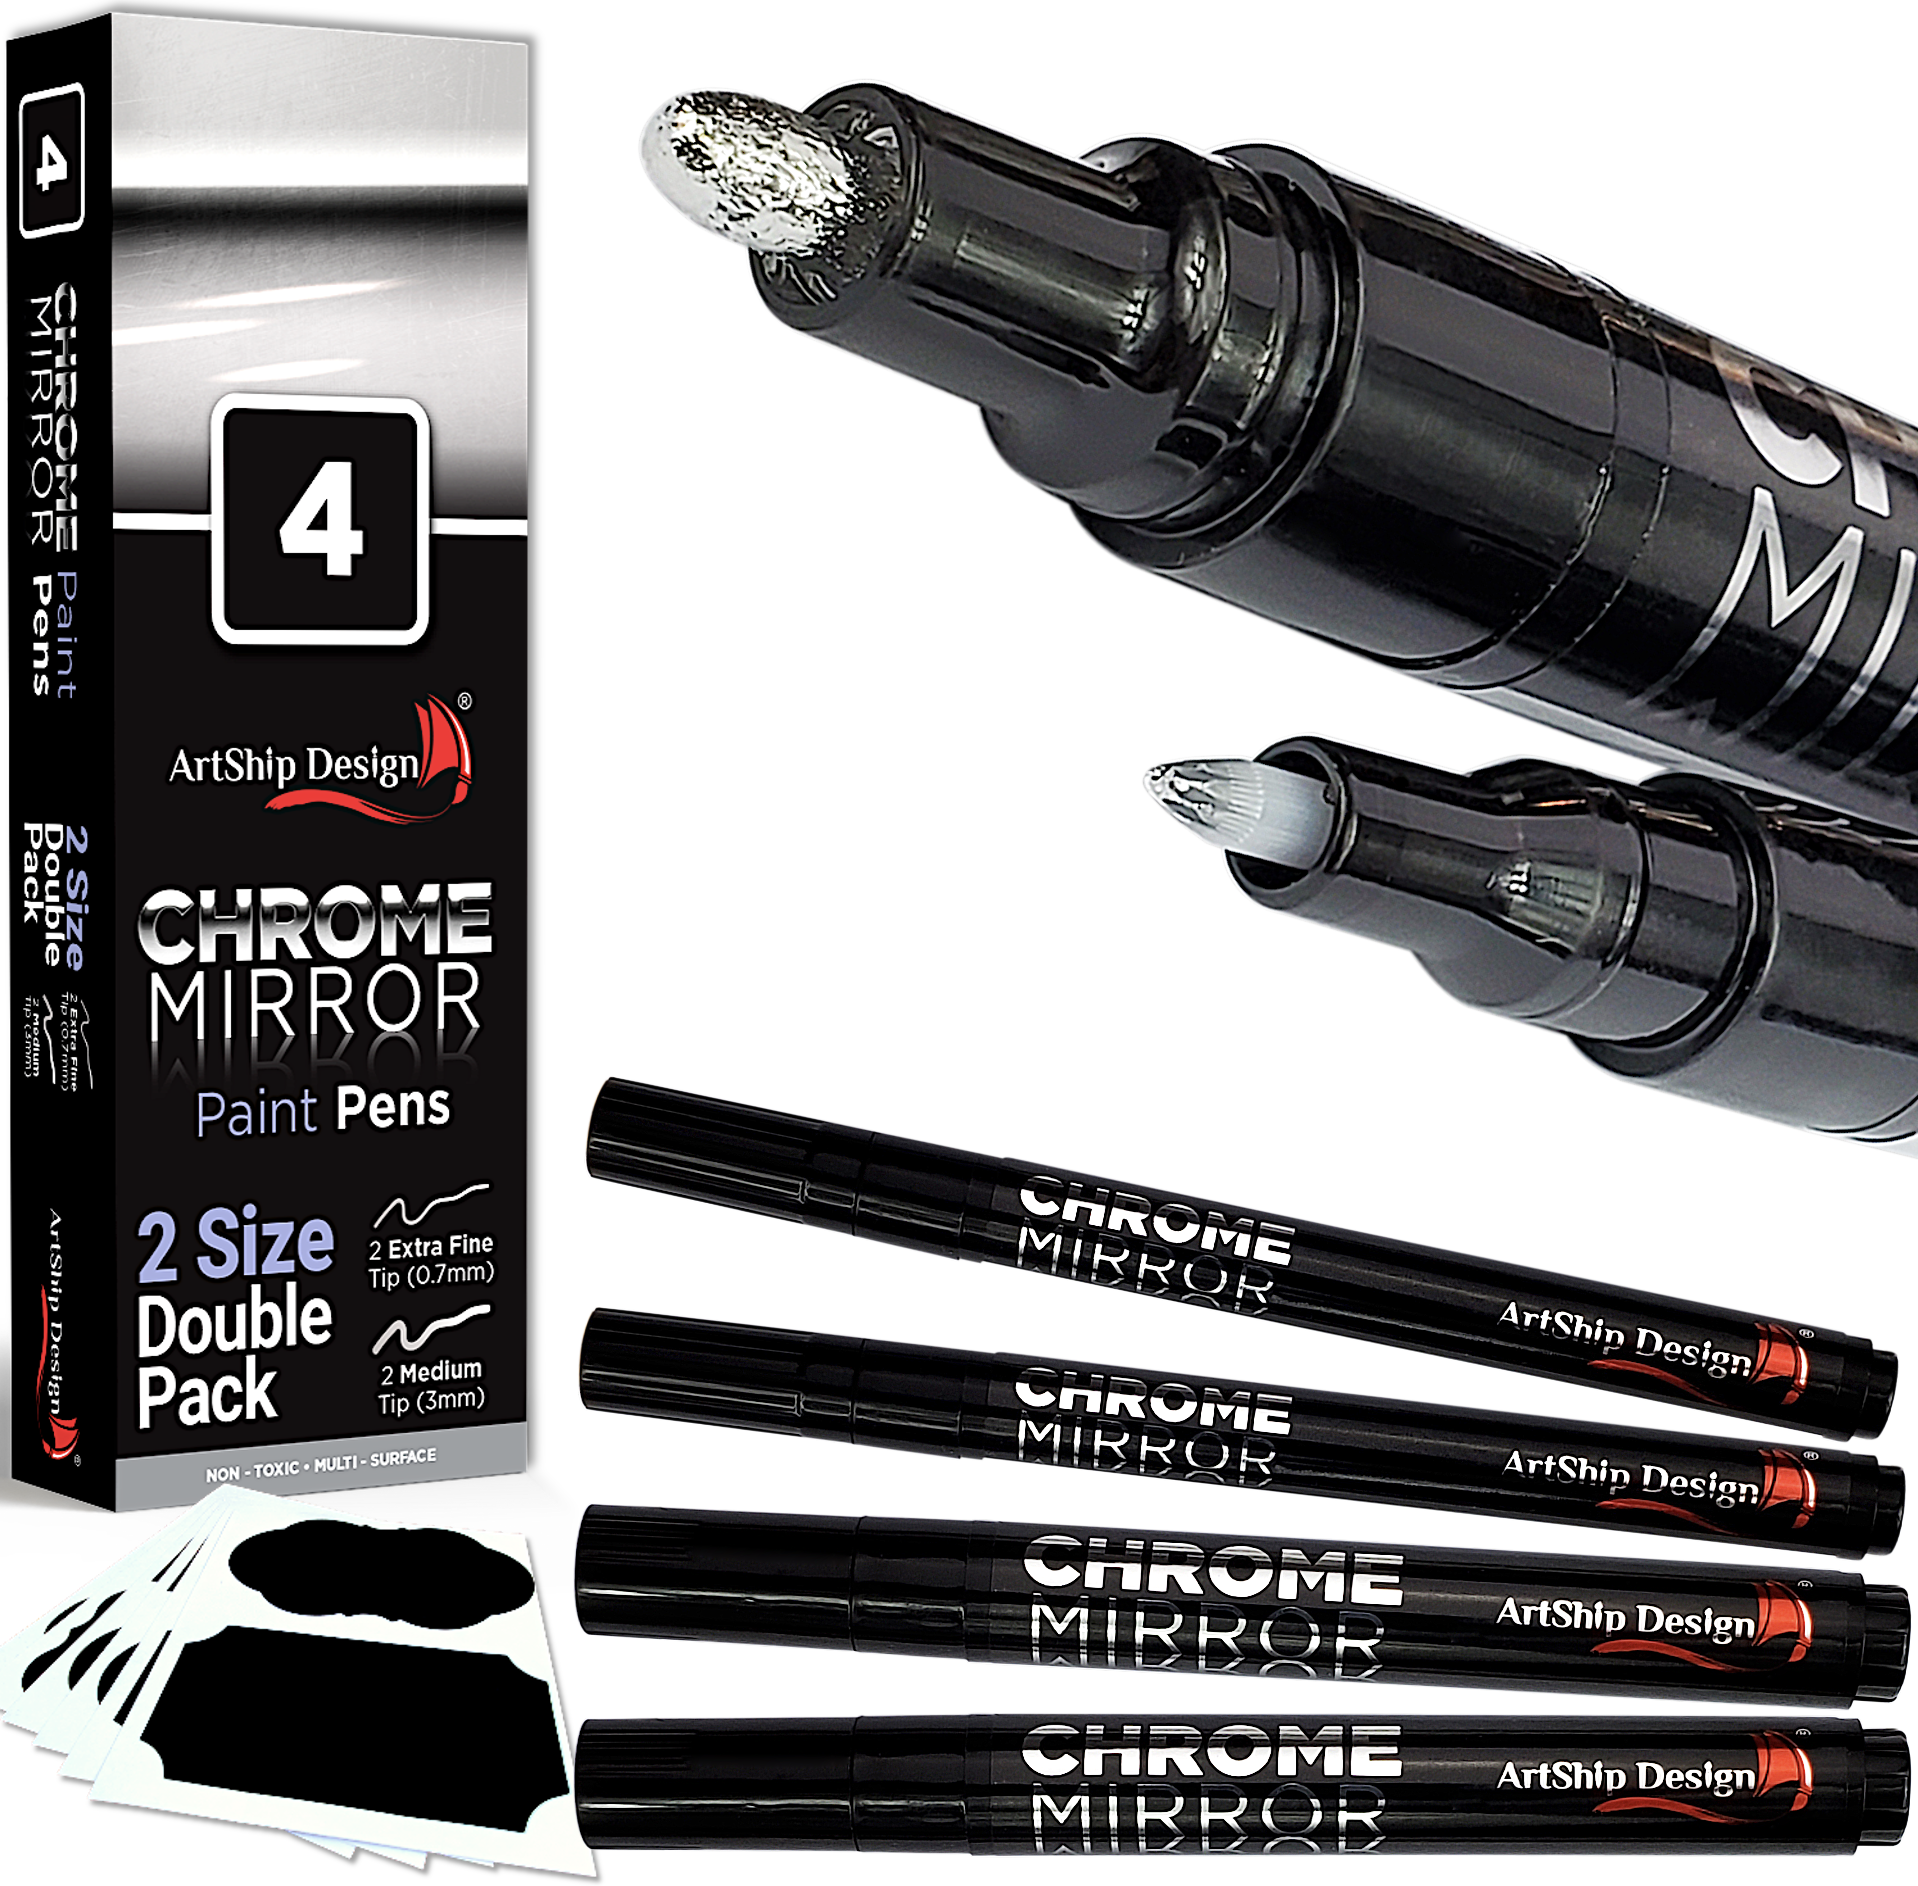 4 Chrome Mirror Paint Pens, Double Pack of Both Extra Fine and Medium Tip  Paint Markers - ArtShip Design